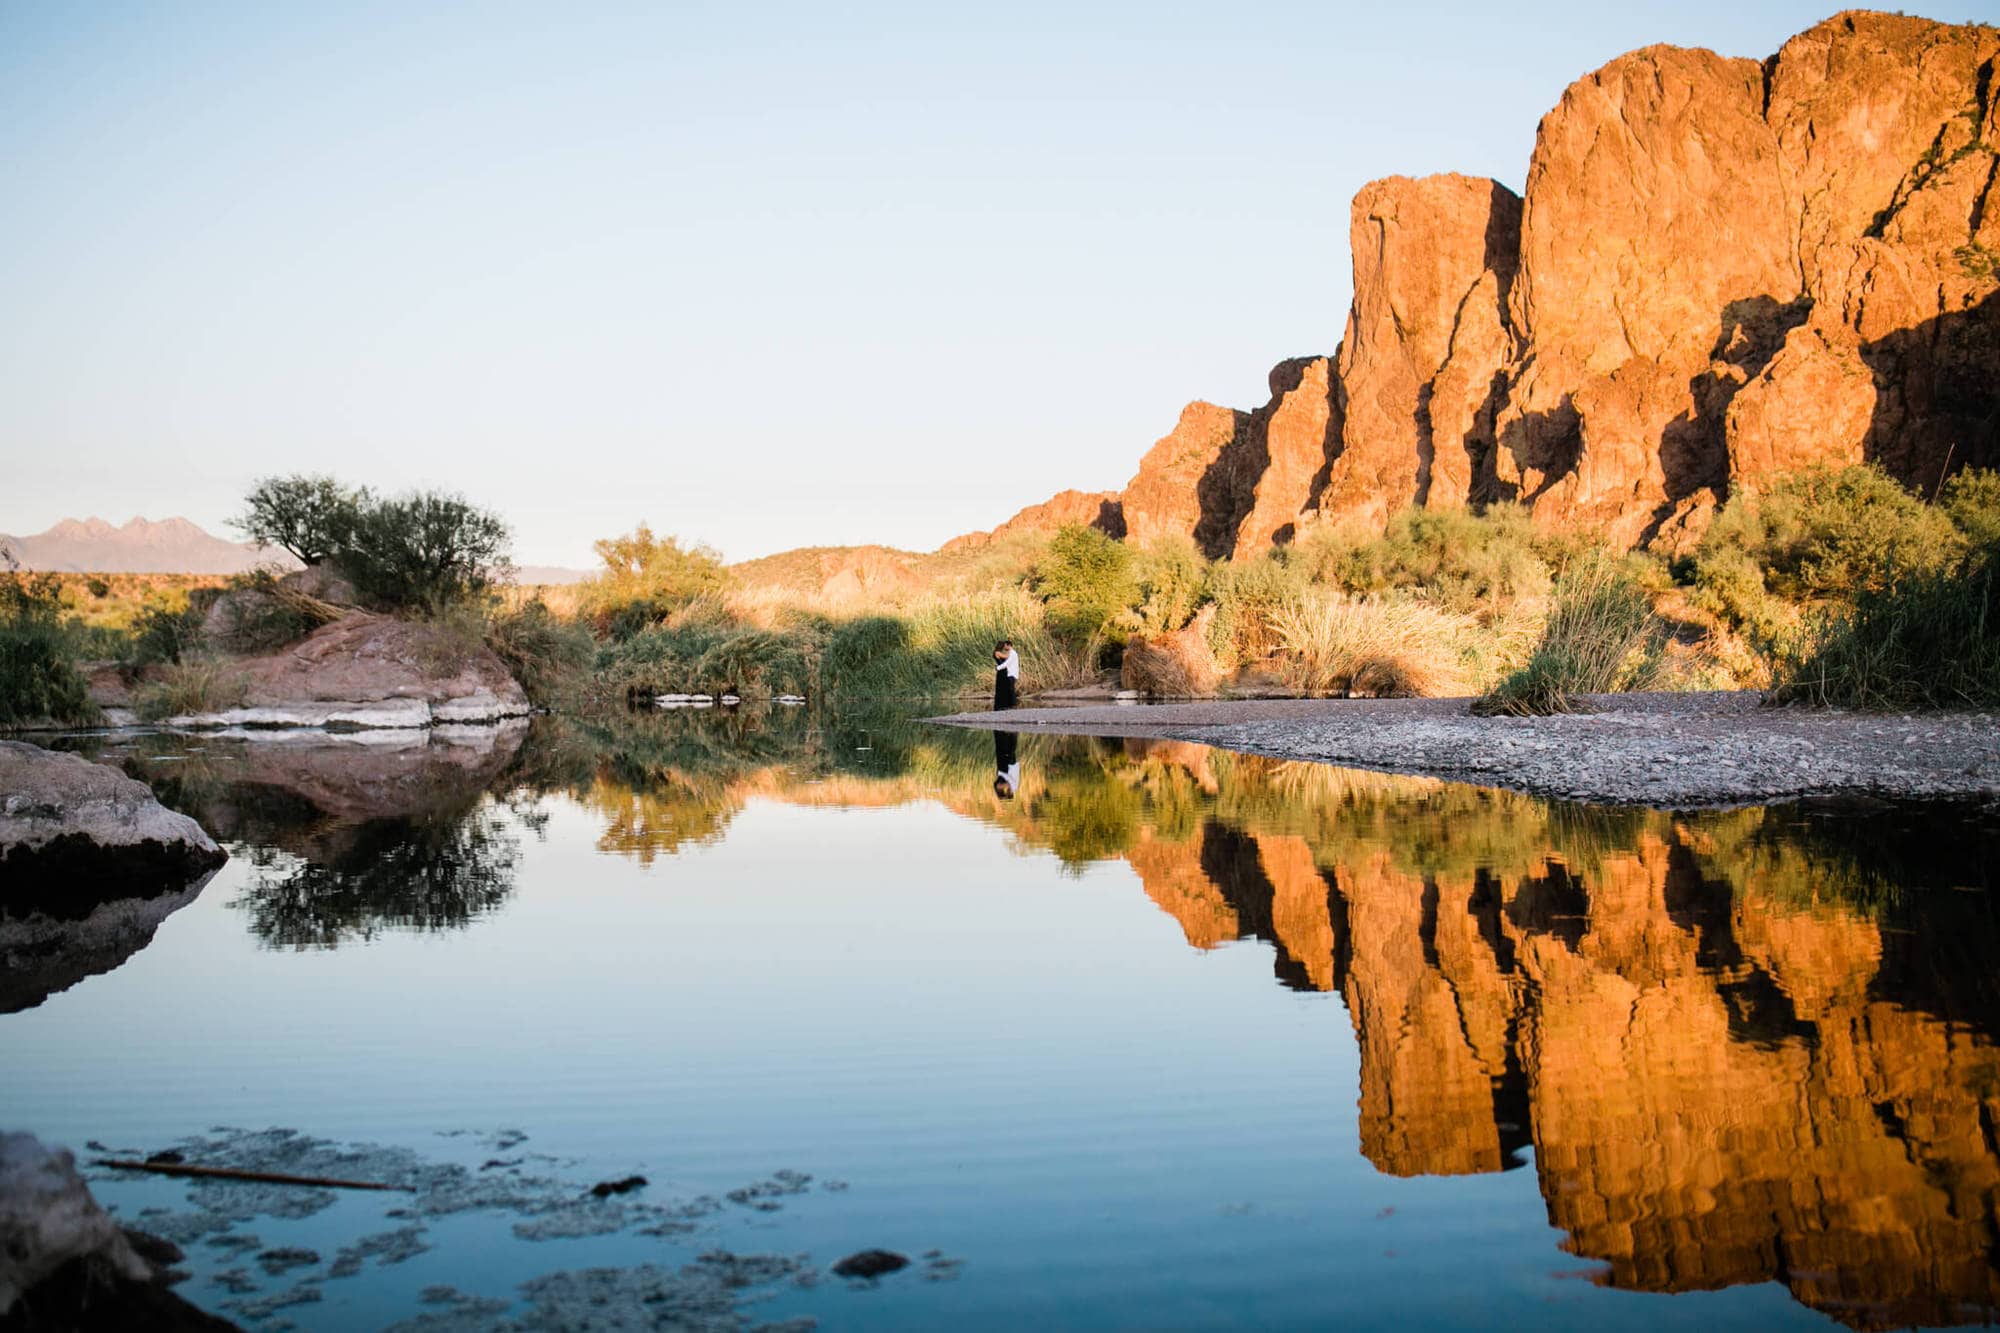 The adventurous couple looks tiny next to the tall, sunlit desert cliffs. Their reflection is perfect on the still water.